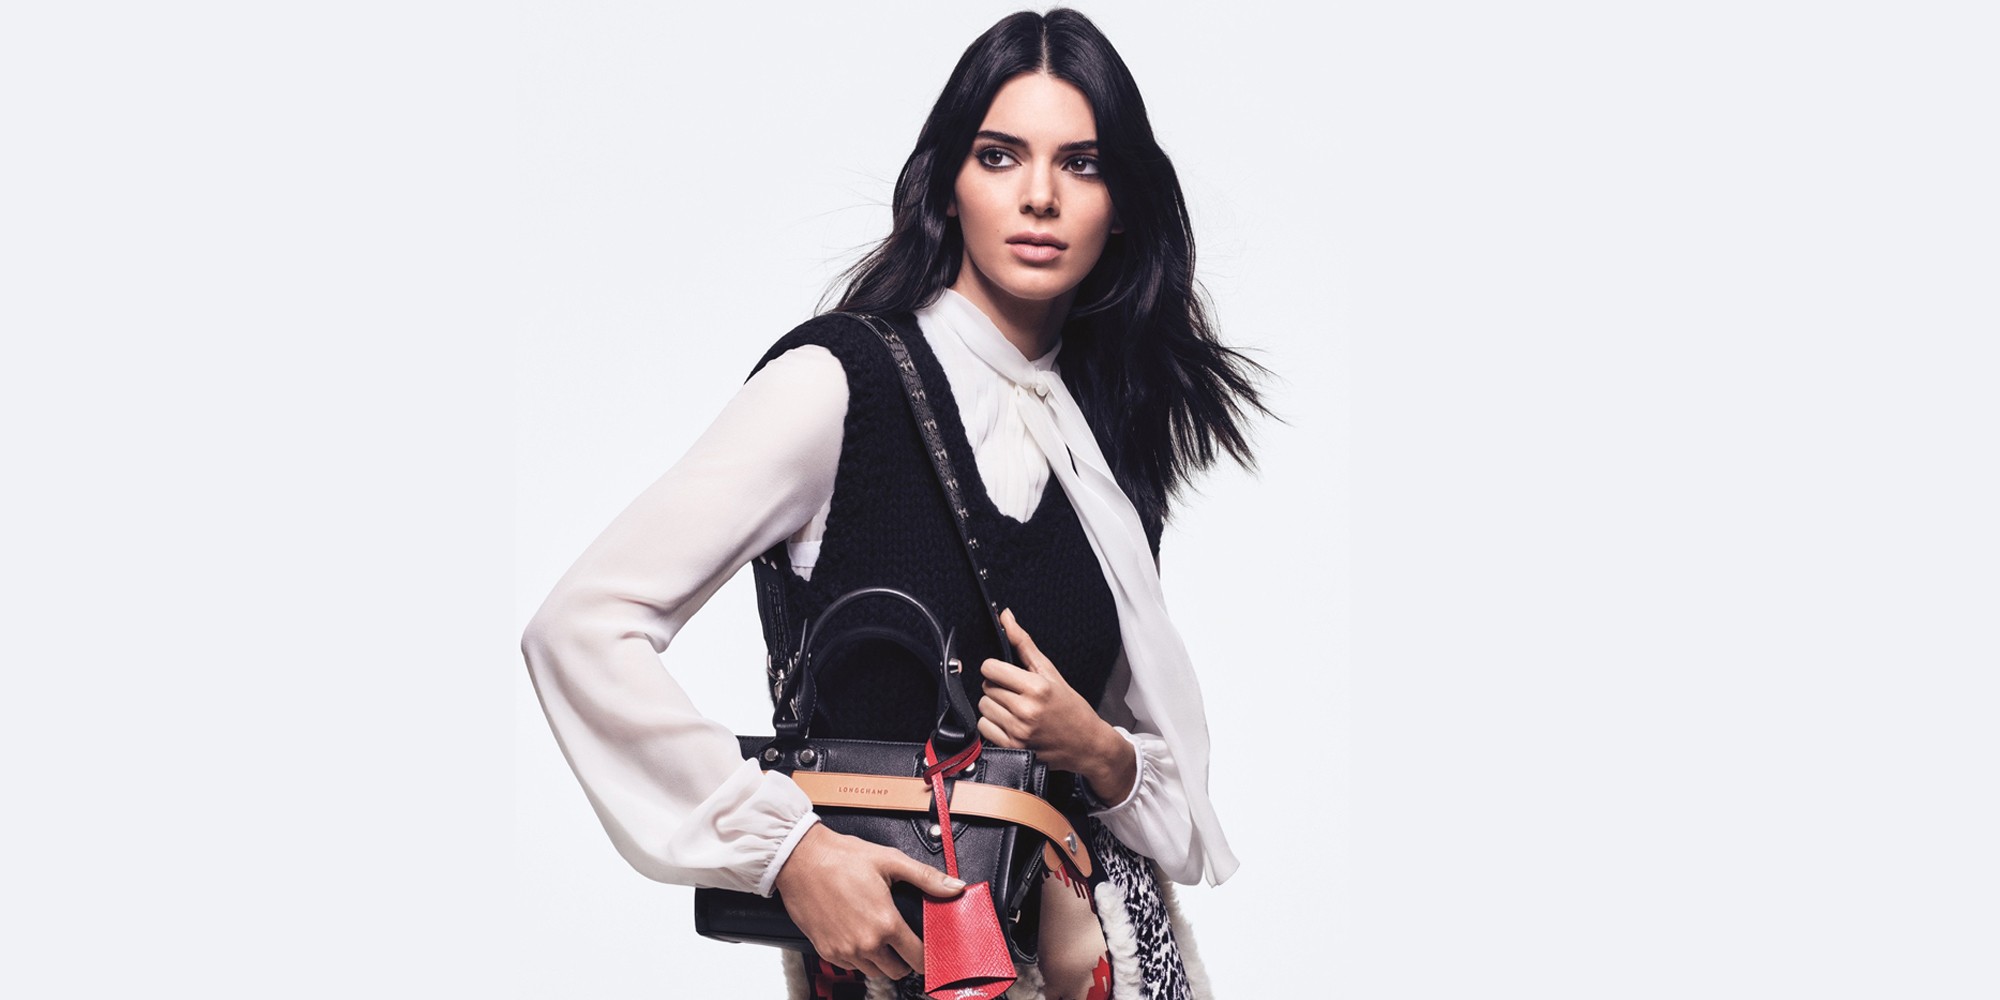 Longchamp's Fall/Winter 19 Campaign Starring Kendall Jenner